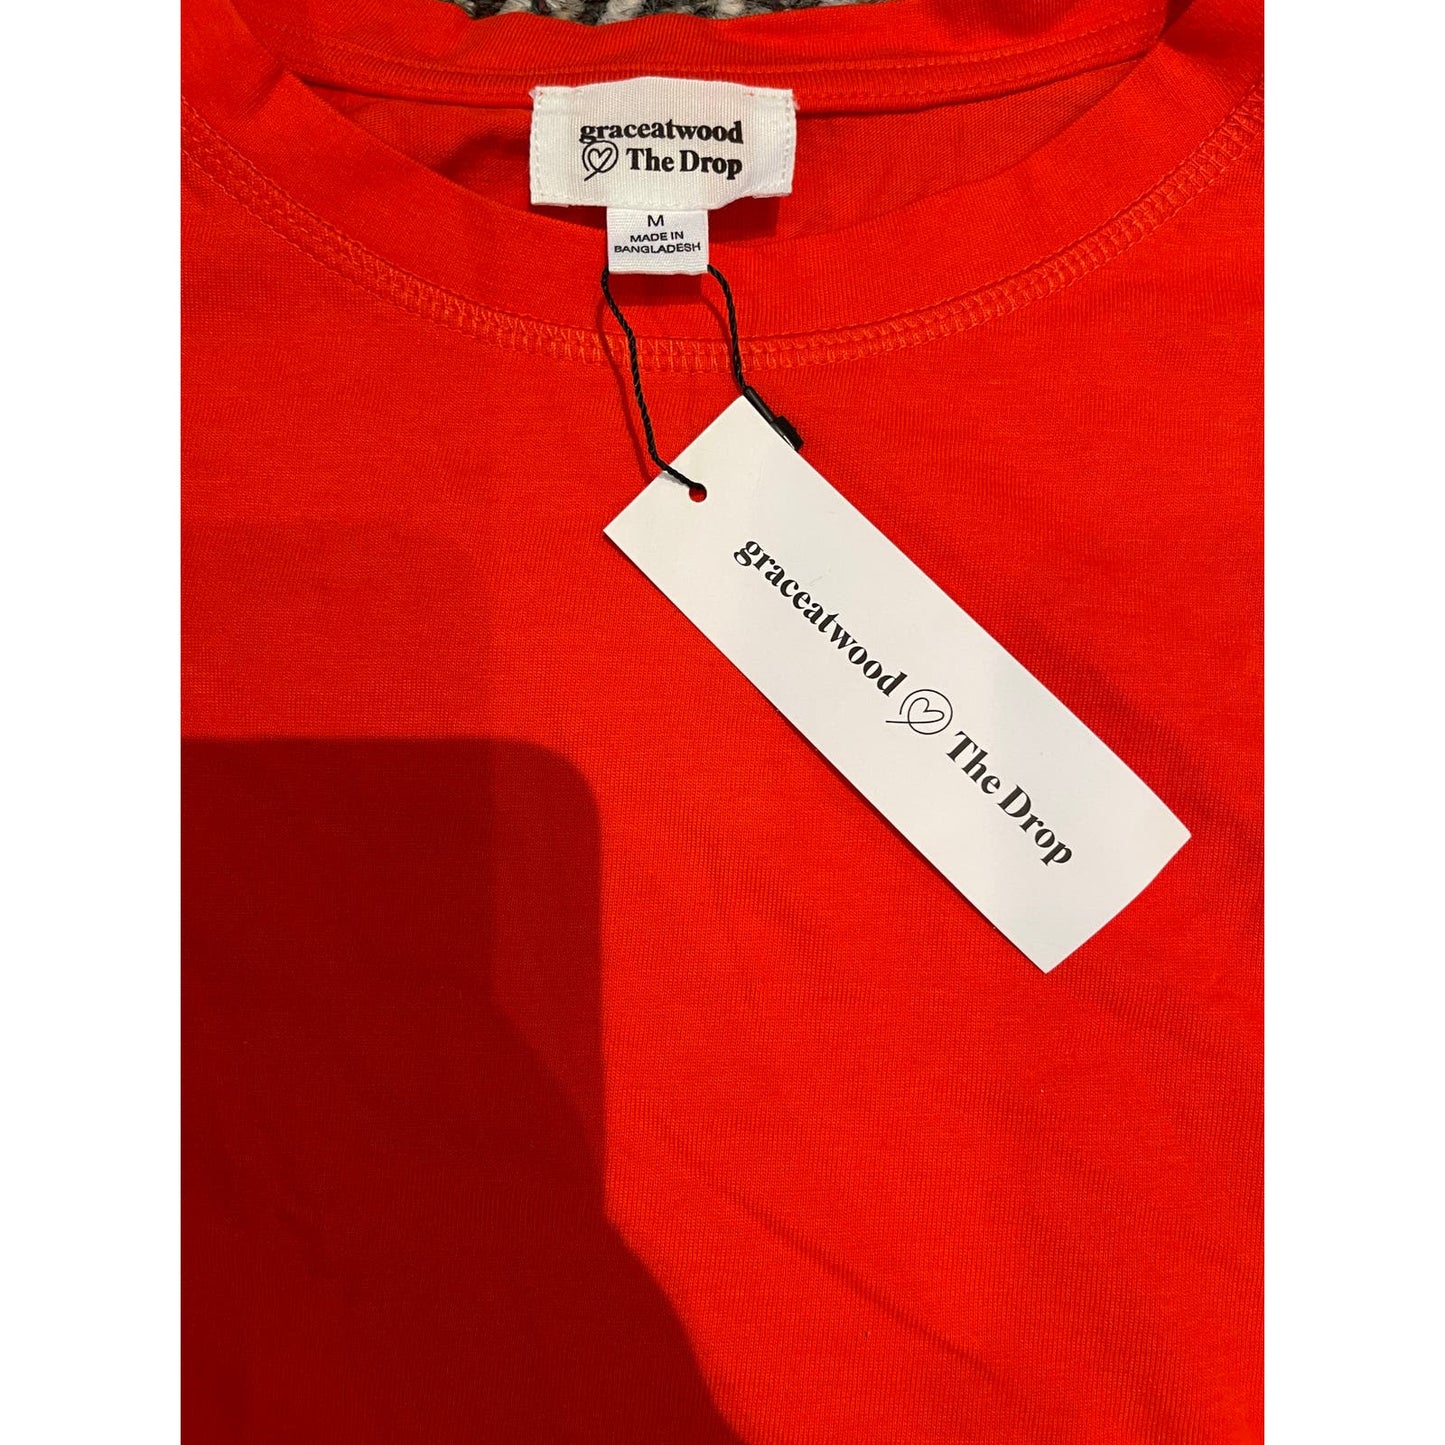 NWT Grace Atwood The Drop Orange Drop Shoulder Tee With Side Slits Size Medium